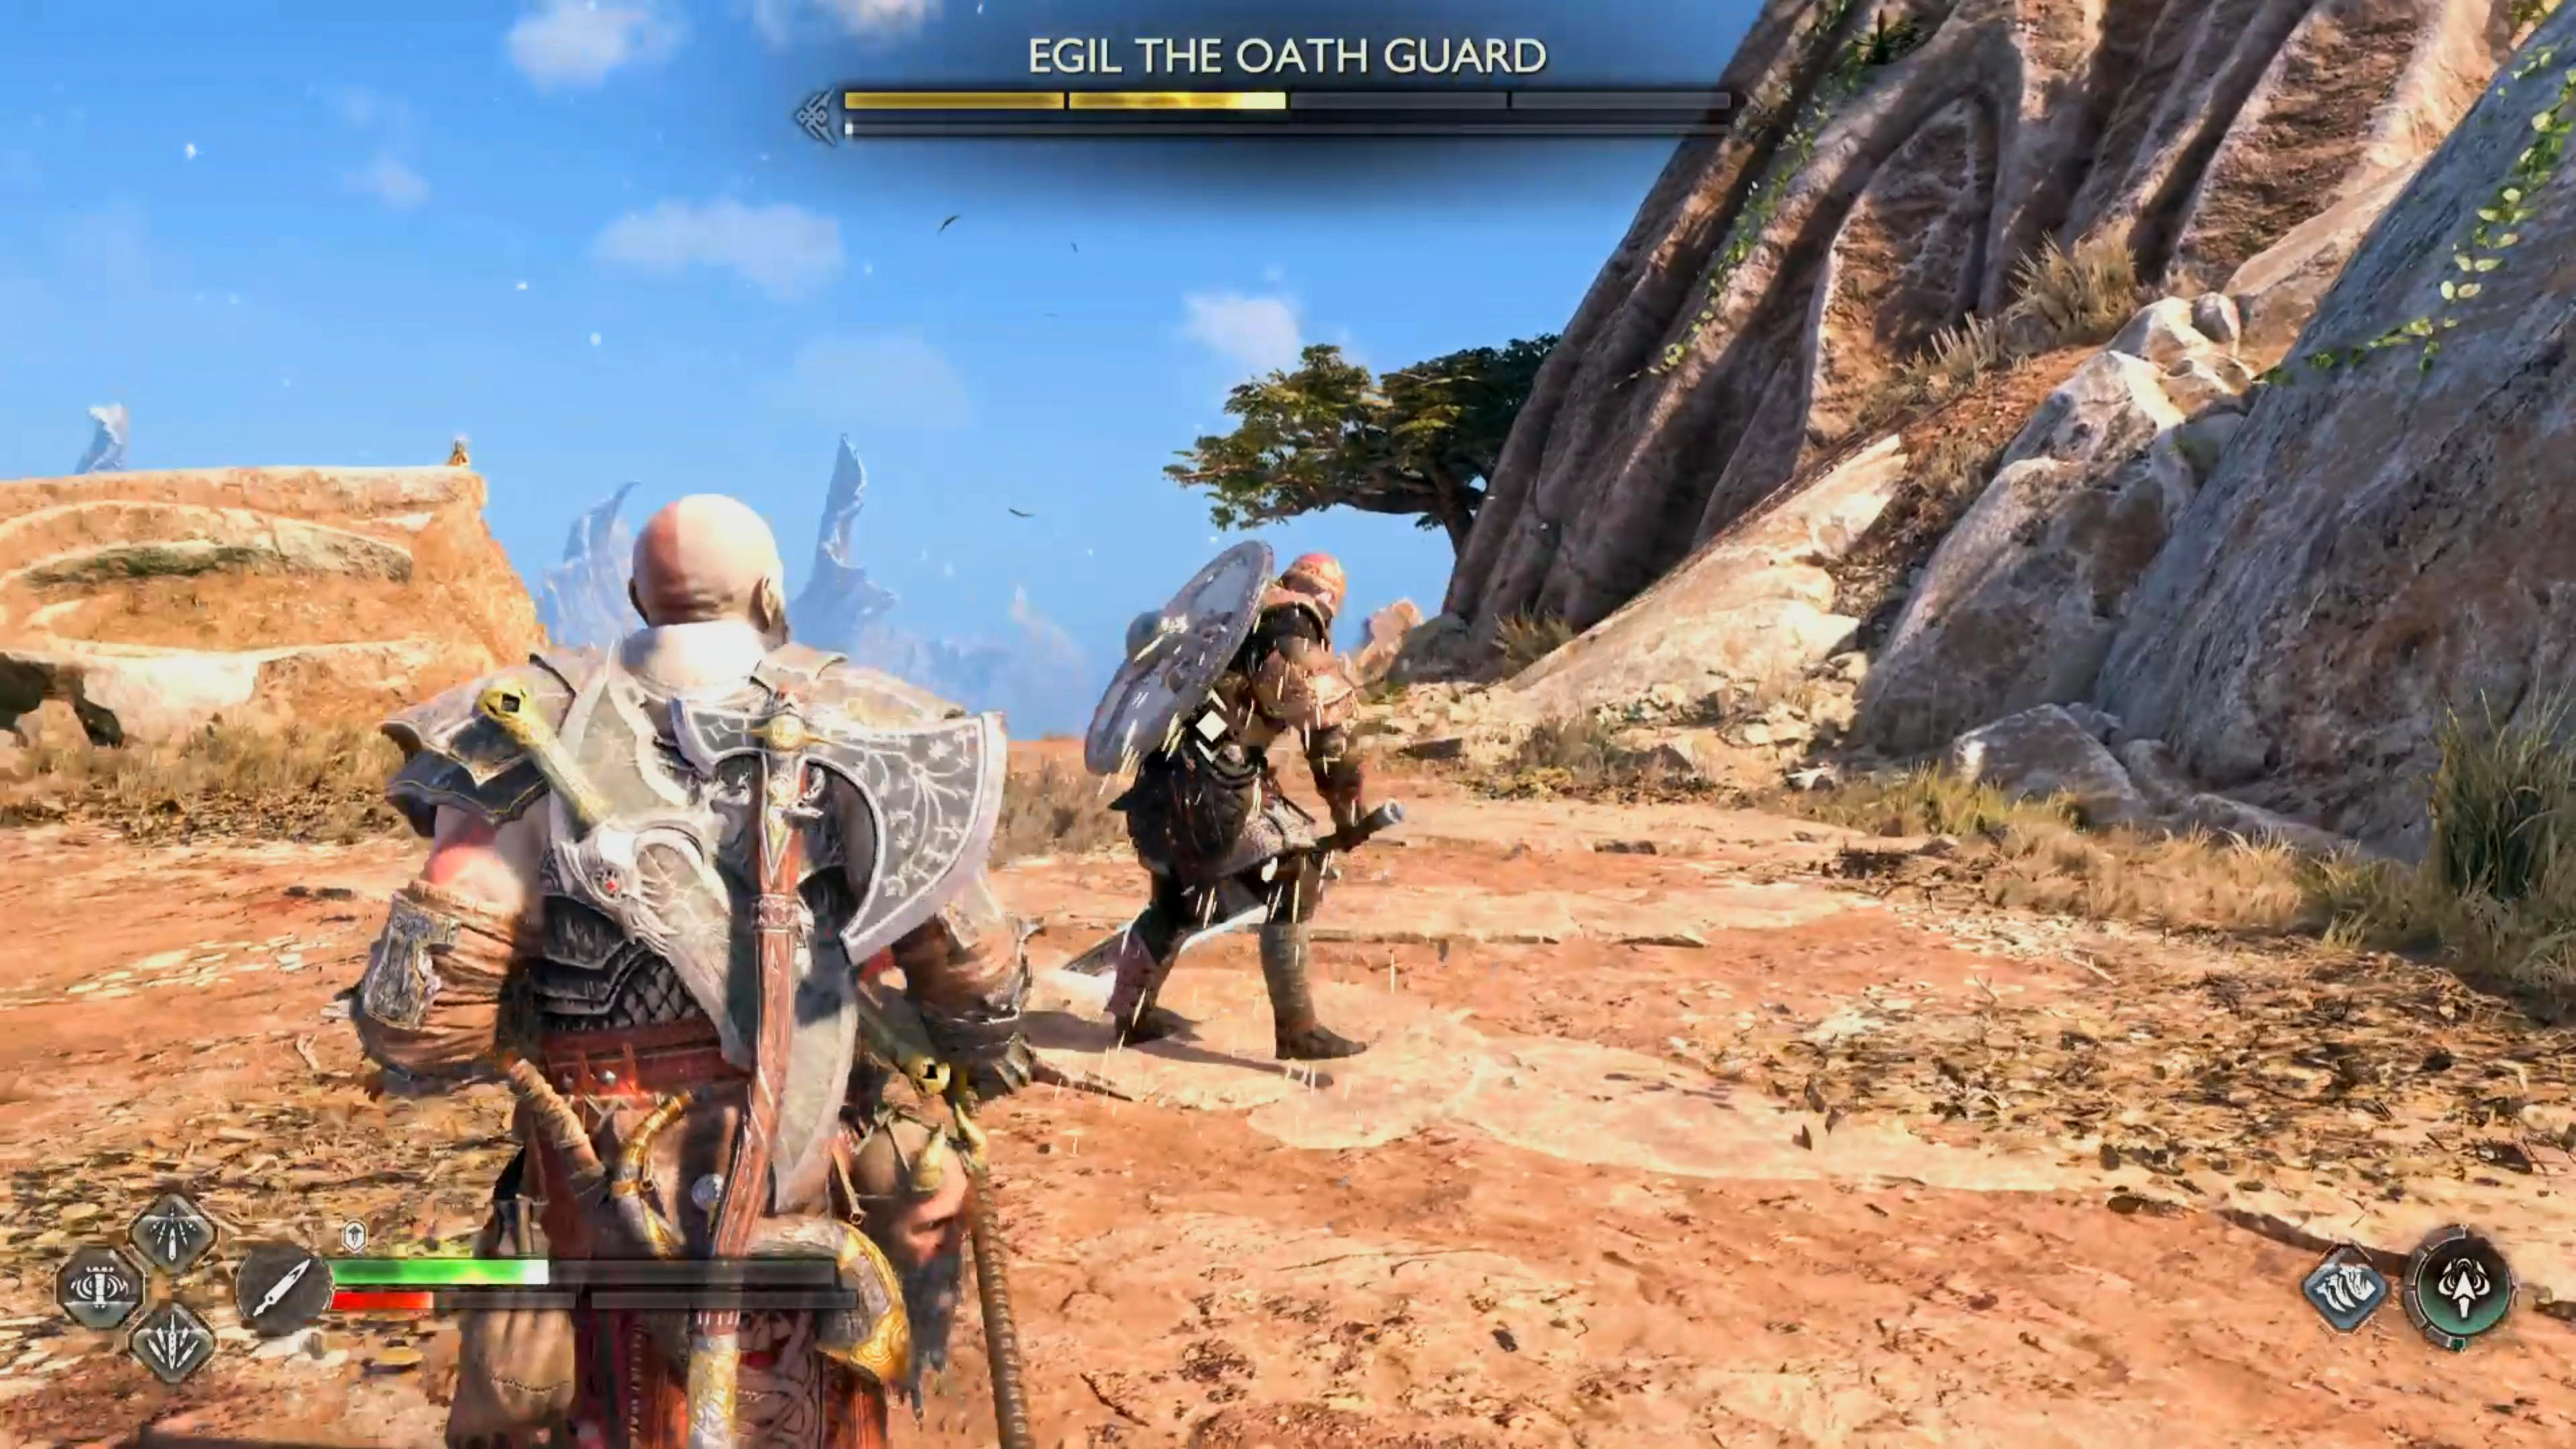 When Egil is approaching you in this stance, he'll counter you. Bait out his attack, and attack him back.